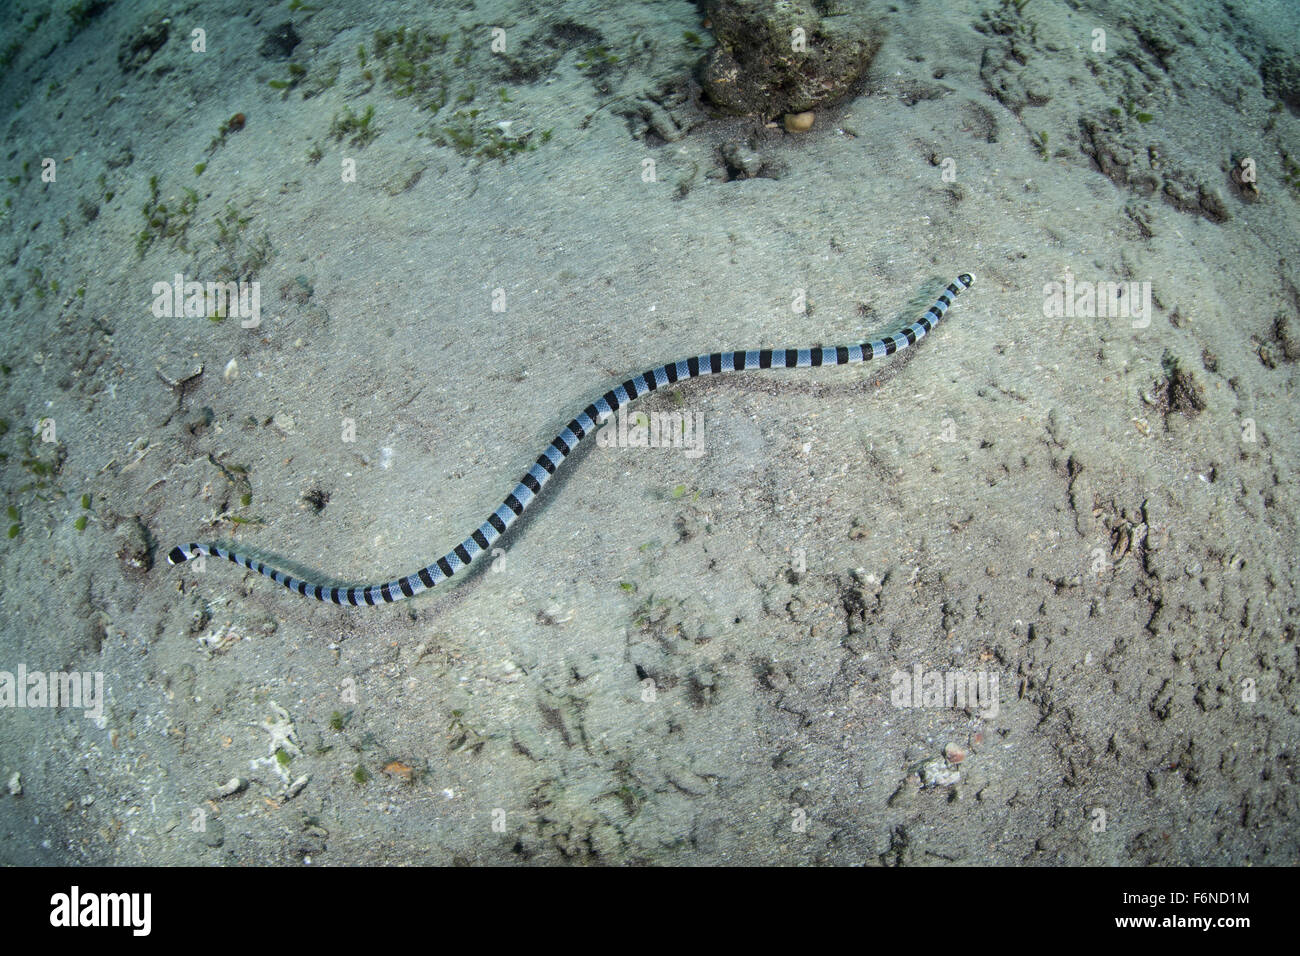 A banded sea snake (Laticauda colubrina) swims over a sandy seafloor in Indonesia. This venomous reptile feeds on small reef fis Stock Photo